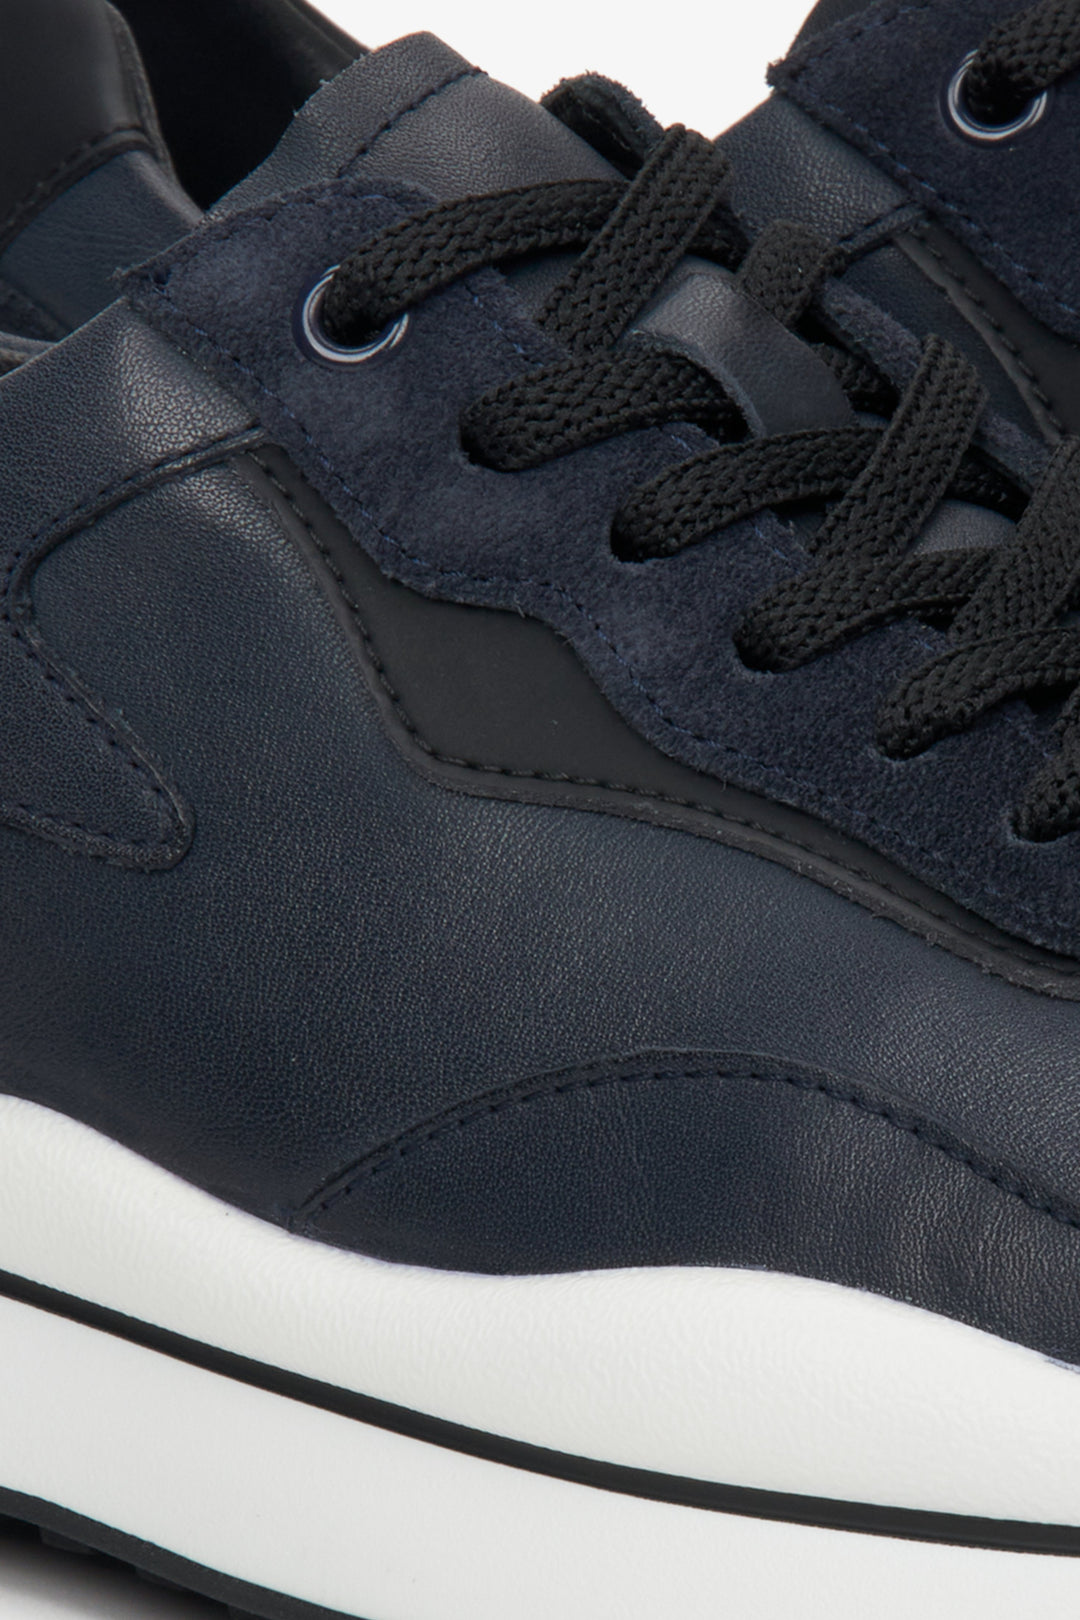 ES 8 men's sneakers in navy blue and black - close-up on the lacing system and details.